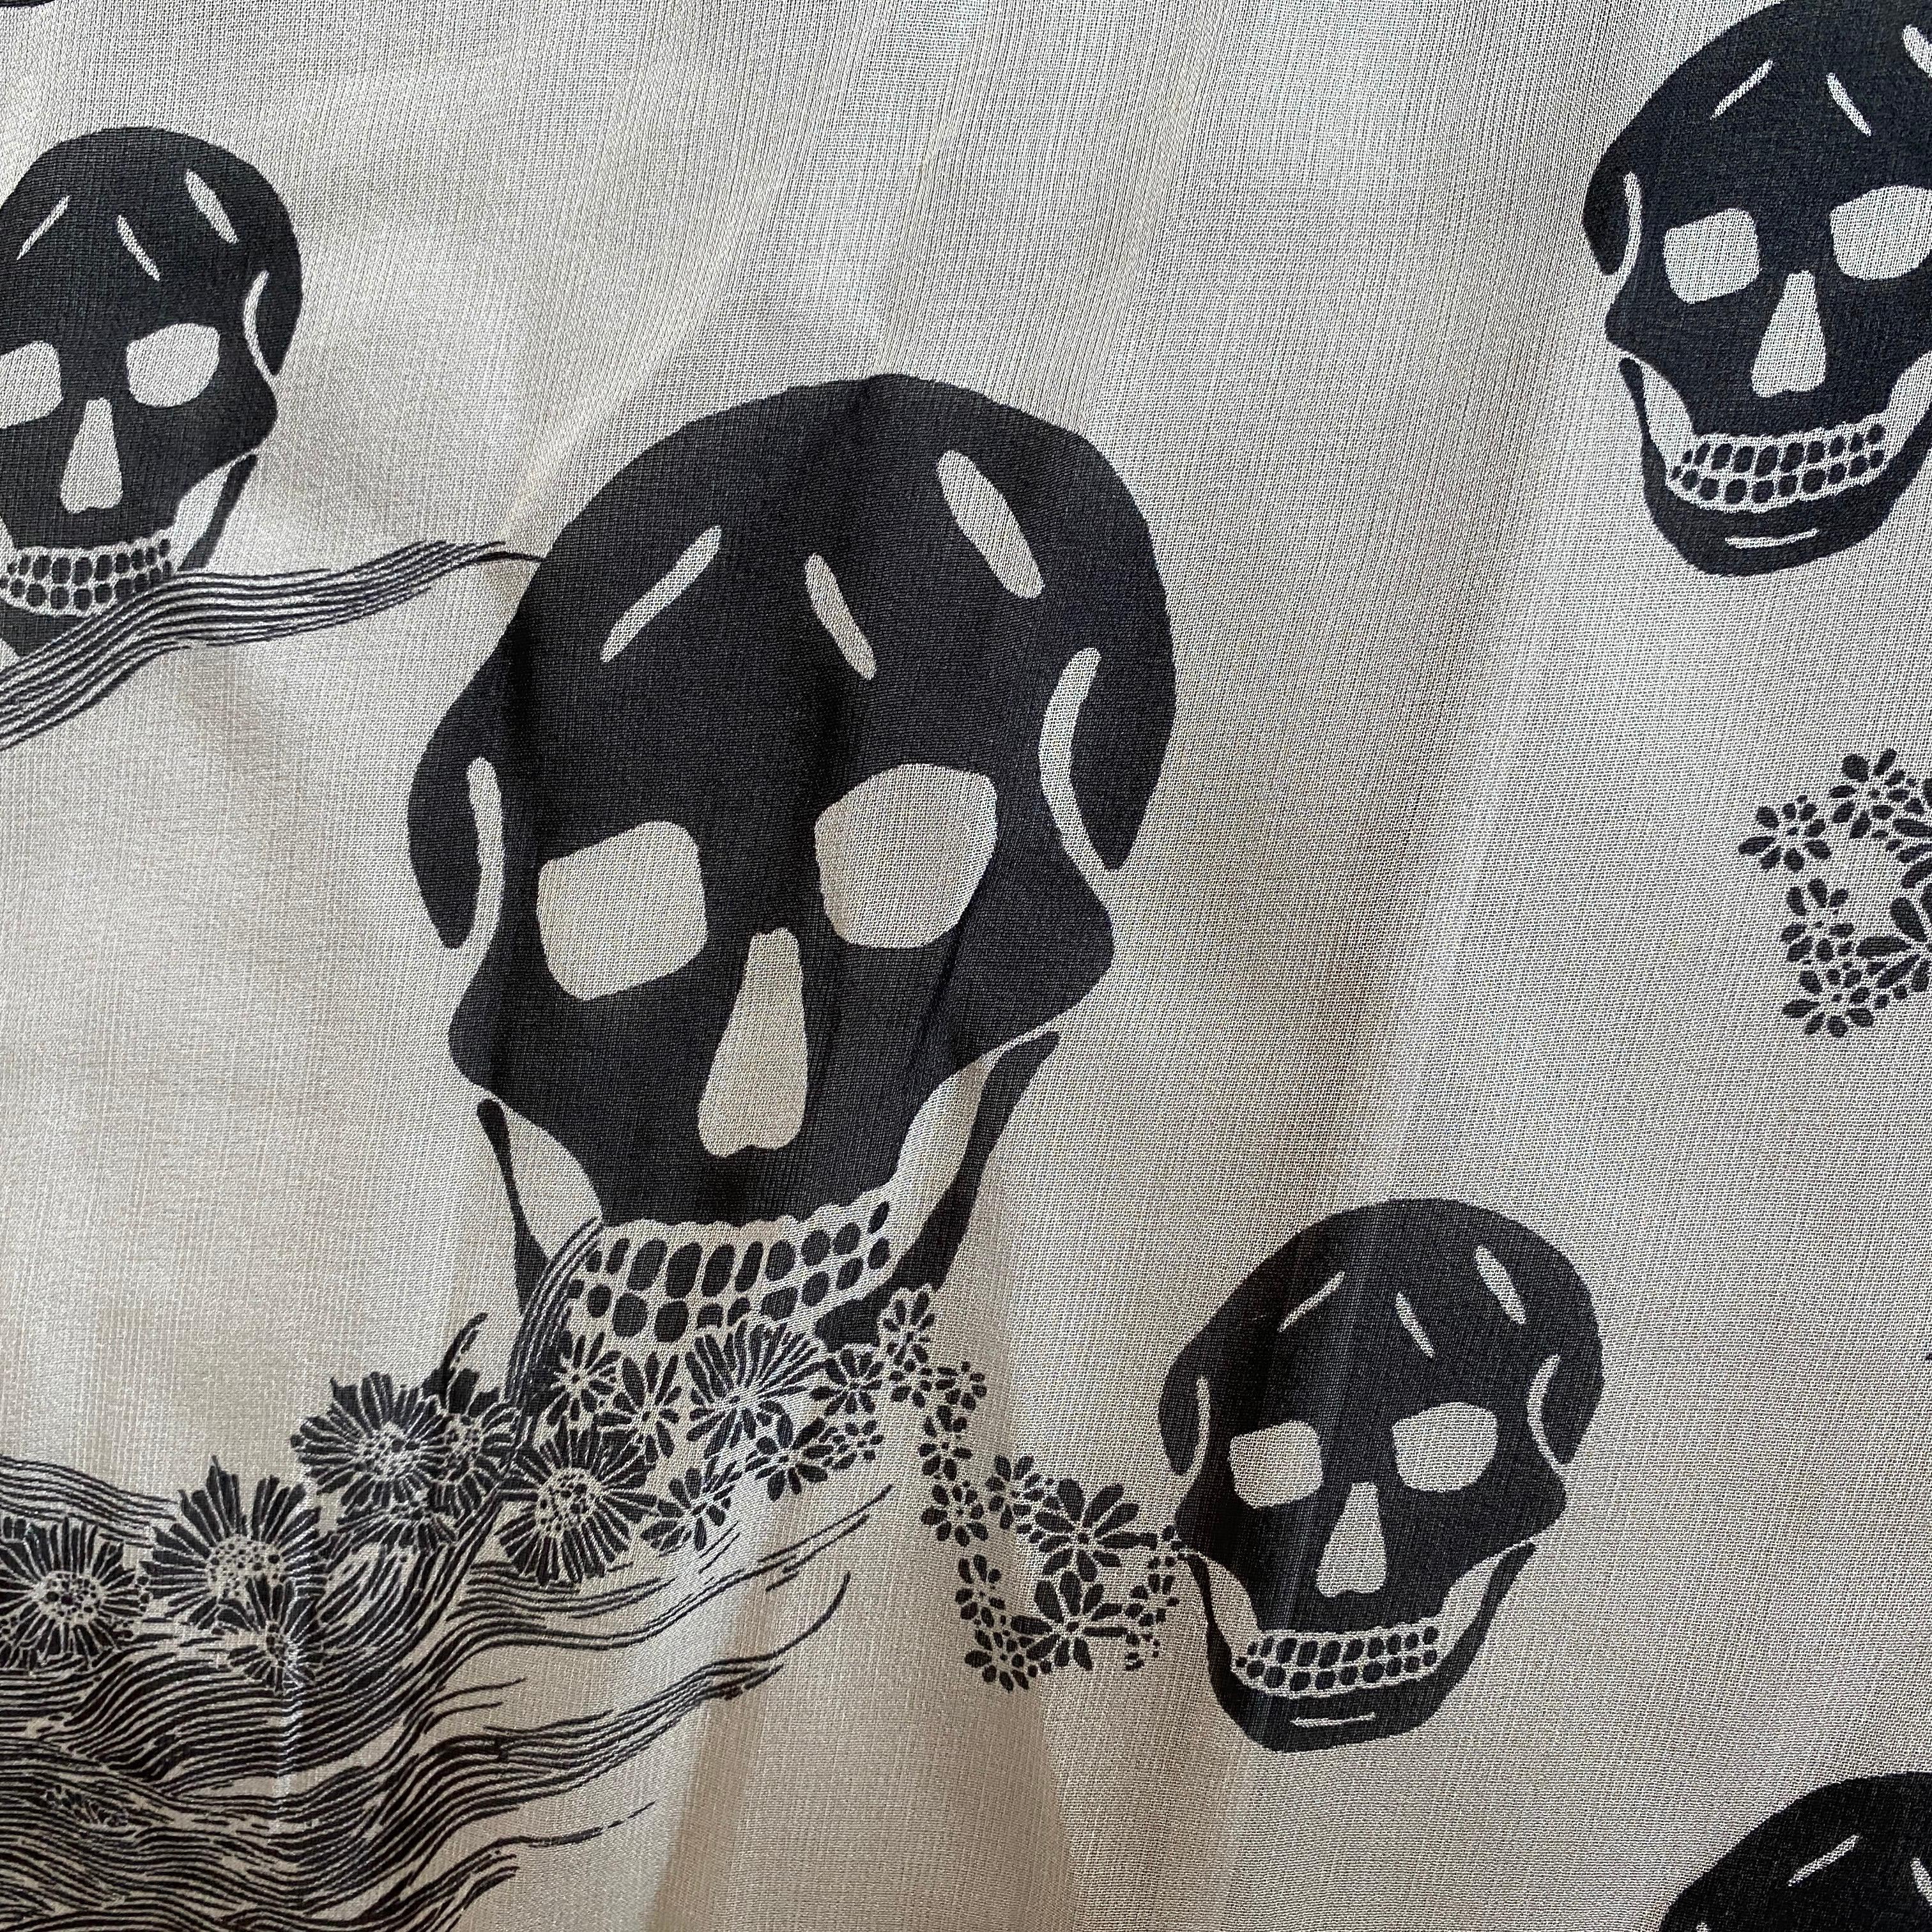 An Iconic Alexander McQueen Black and white Silk Scarf 1